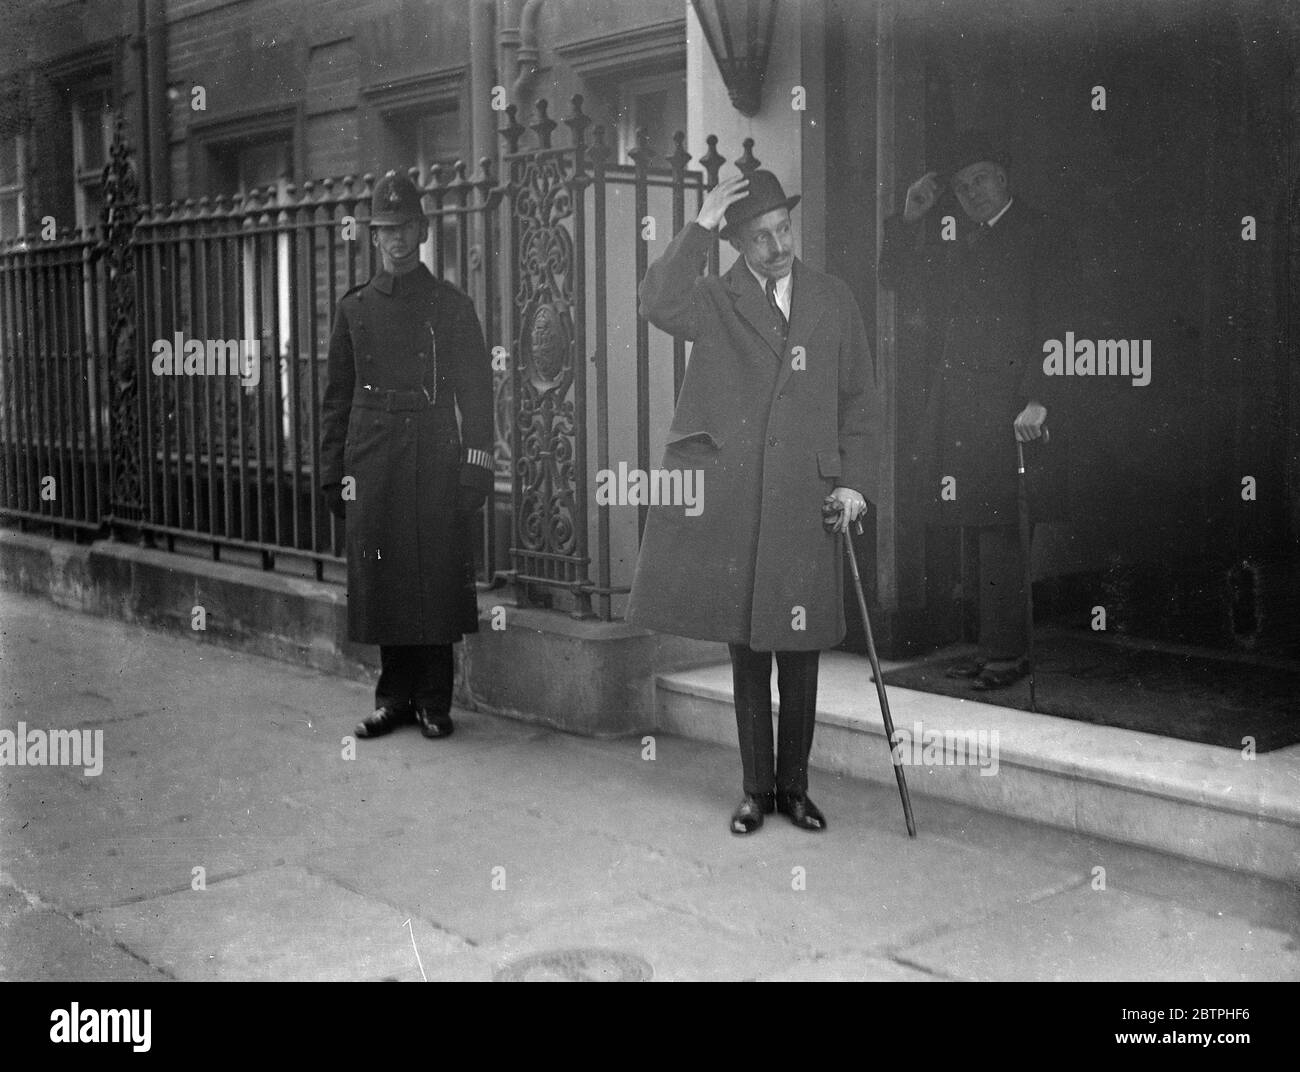 King Alfonso in London . Ex King Alfonso of Spain arrived in London for a private visit .He came quietly , entirely unnoticed among the throng at Victoria station , and traveelled incognito . Acknowledging salutes as he left his hotel in London to visit friends . 8 February 1932 Stock Photo